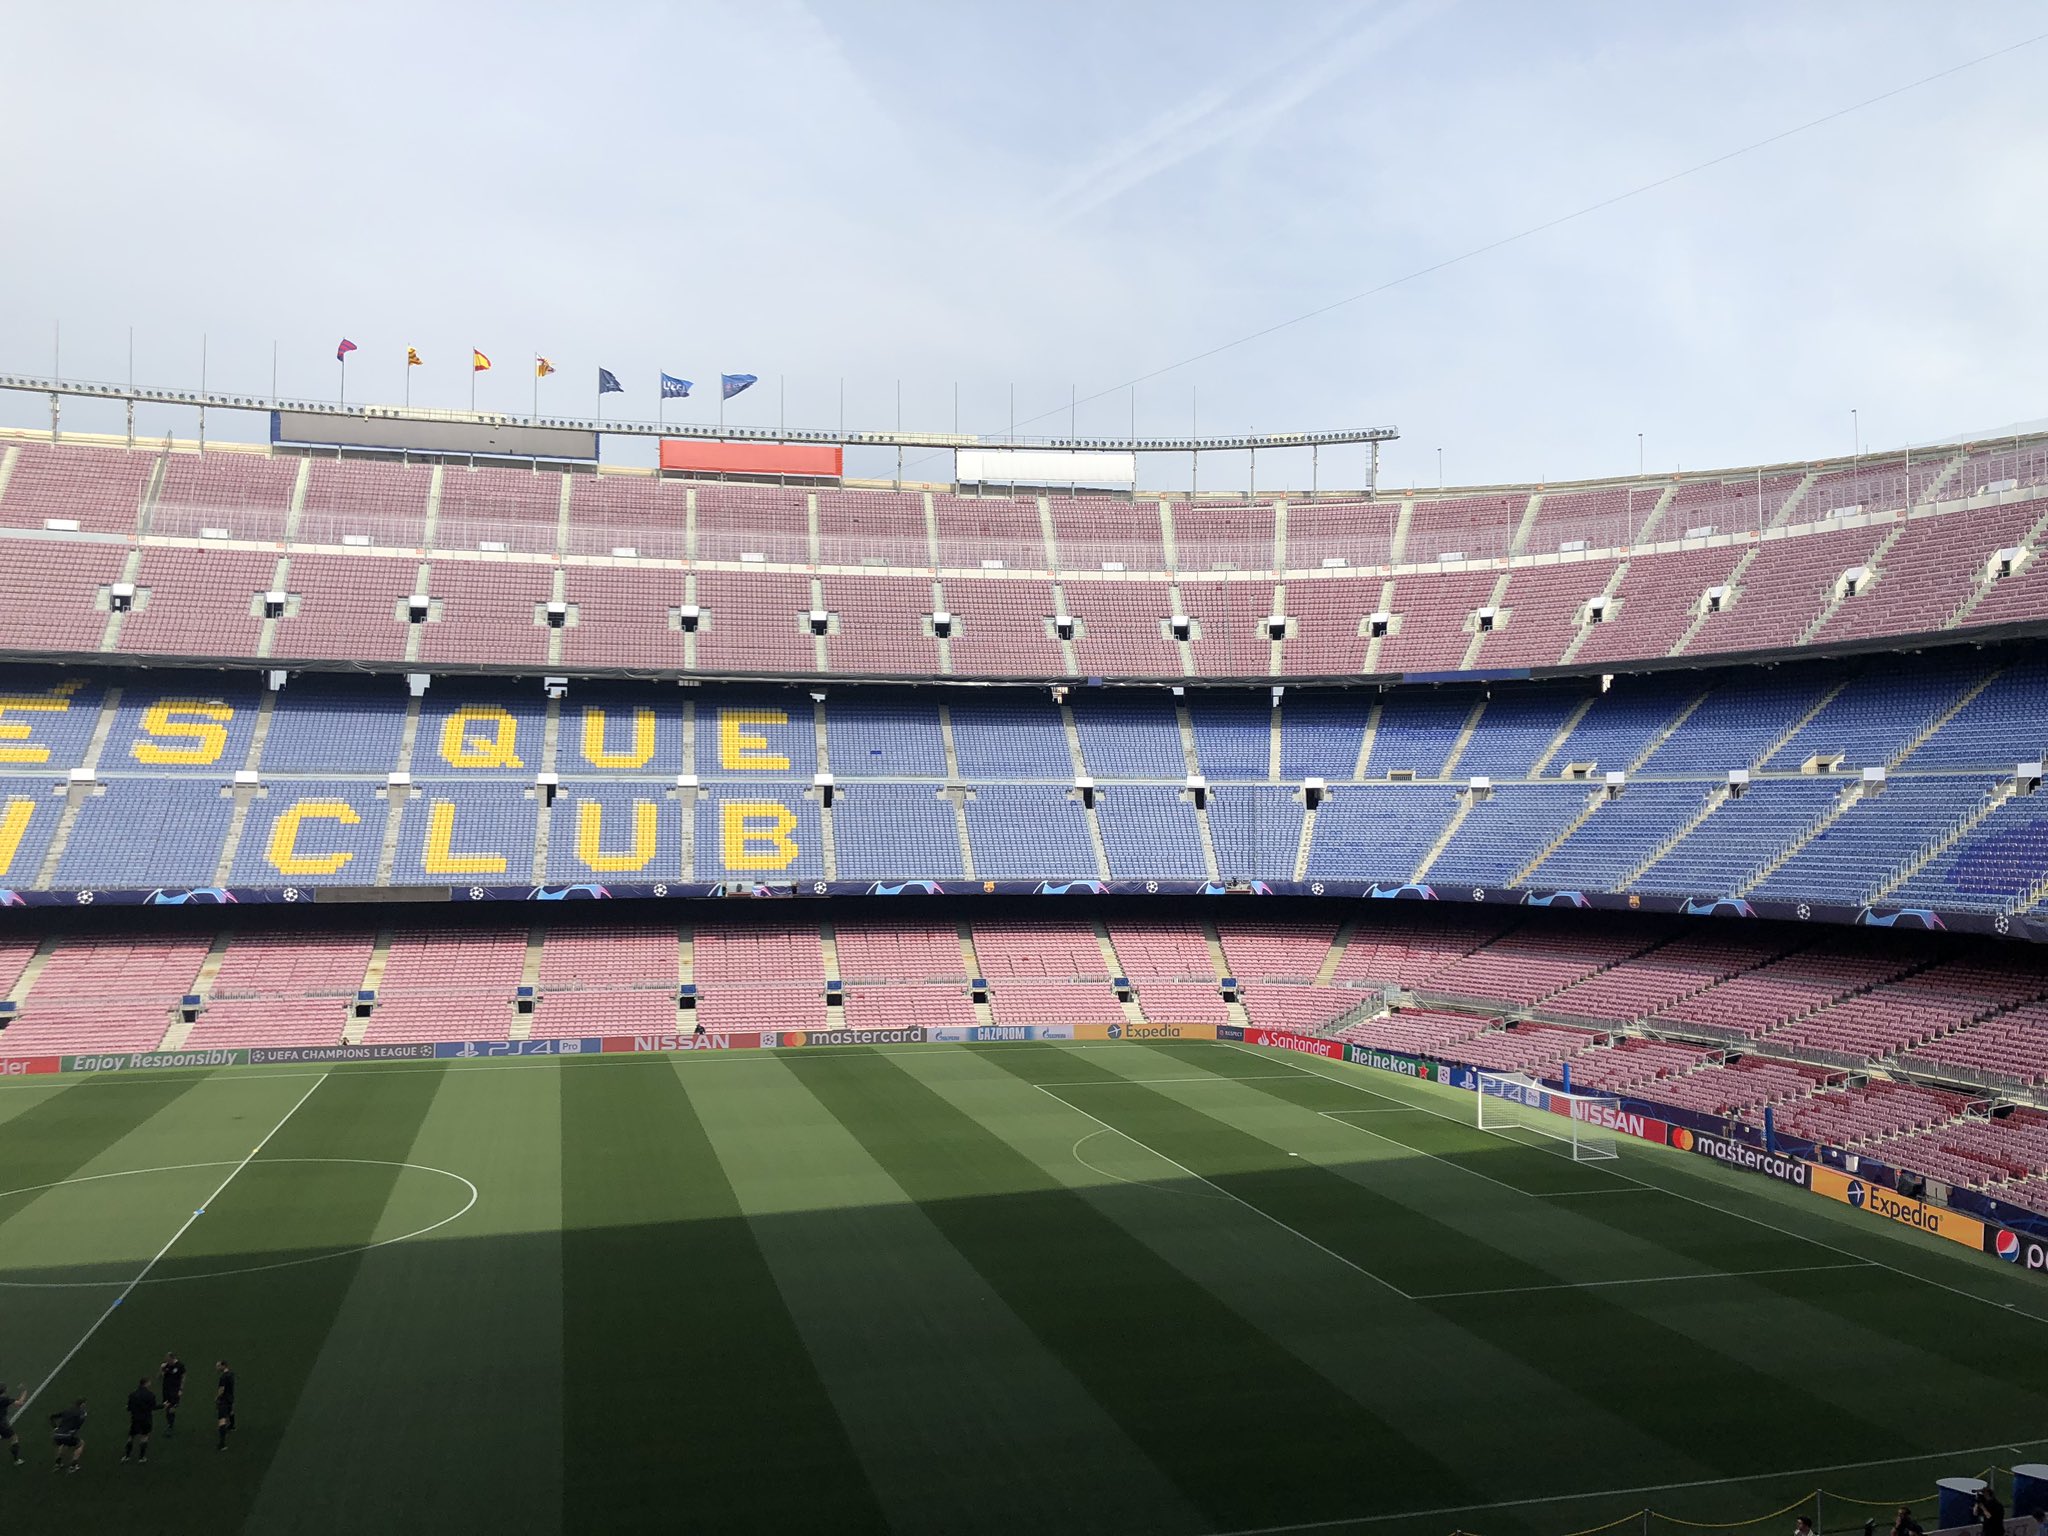 generelt til Hemmelighed Andy Mitten on Twitter: "Camp Nou. The 4,800 away fans wil be in the top  section with the fence in front. https://t.co/7RWk5yRB1N" / Twitter